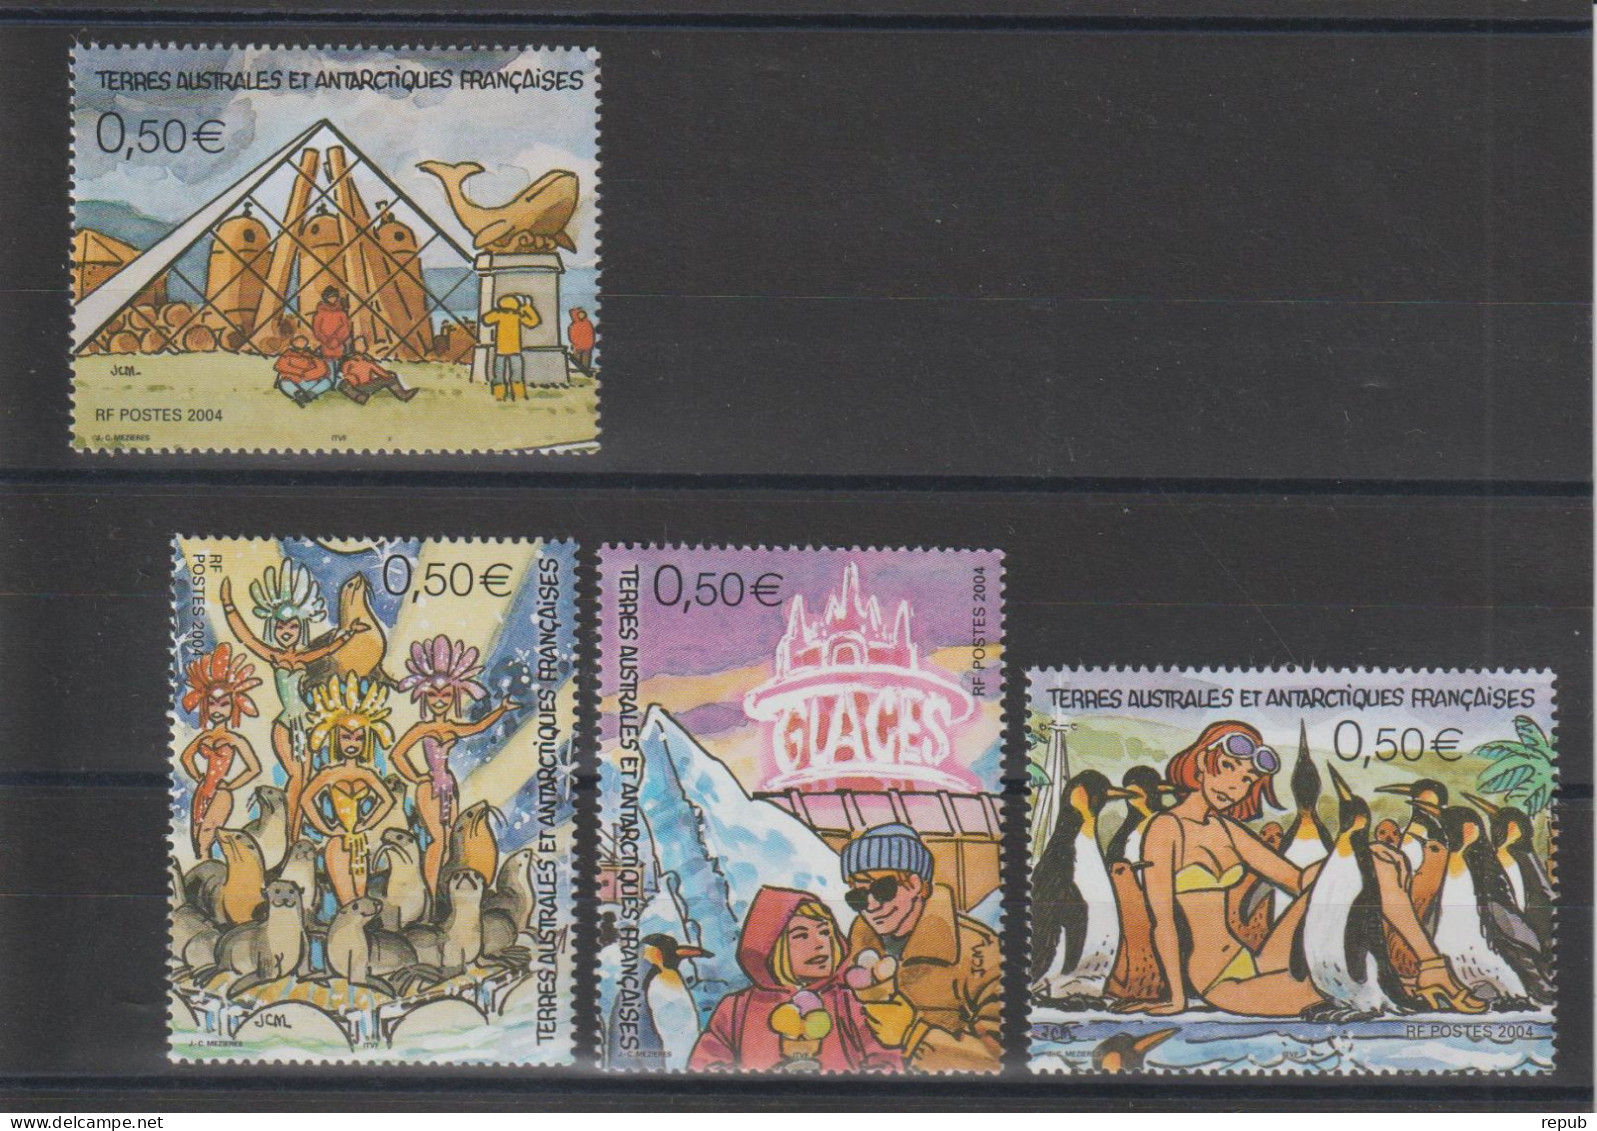 TAAF 2004 Timbres Issus Du BF 12, 399-402, 4 Val ** MNH - Ungebraucht